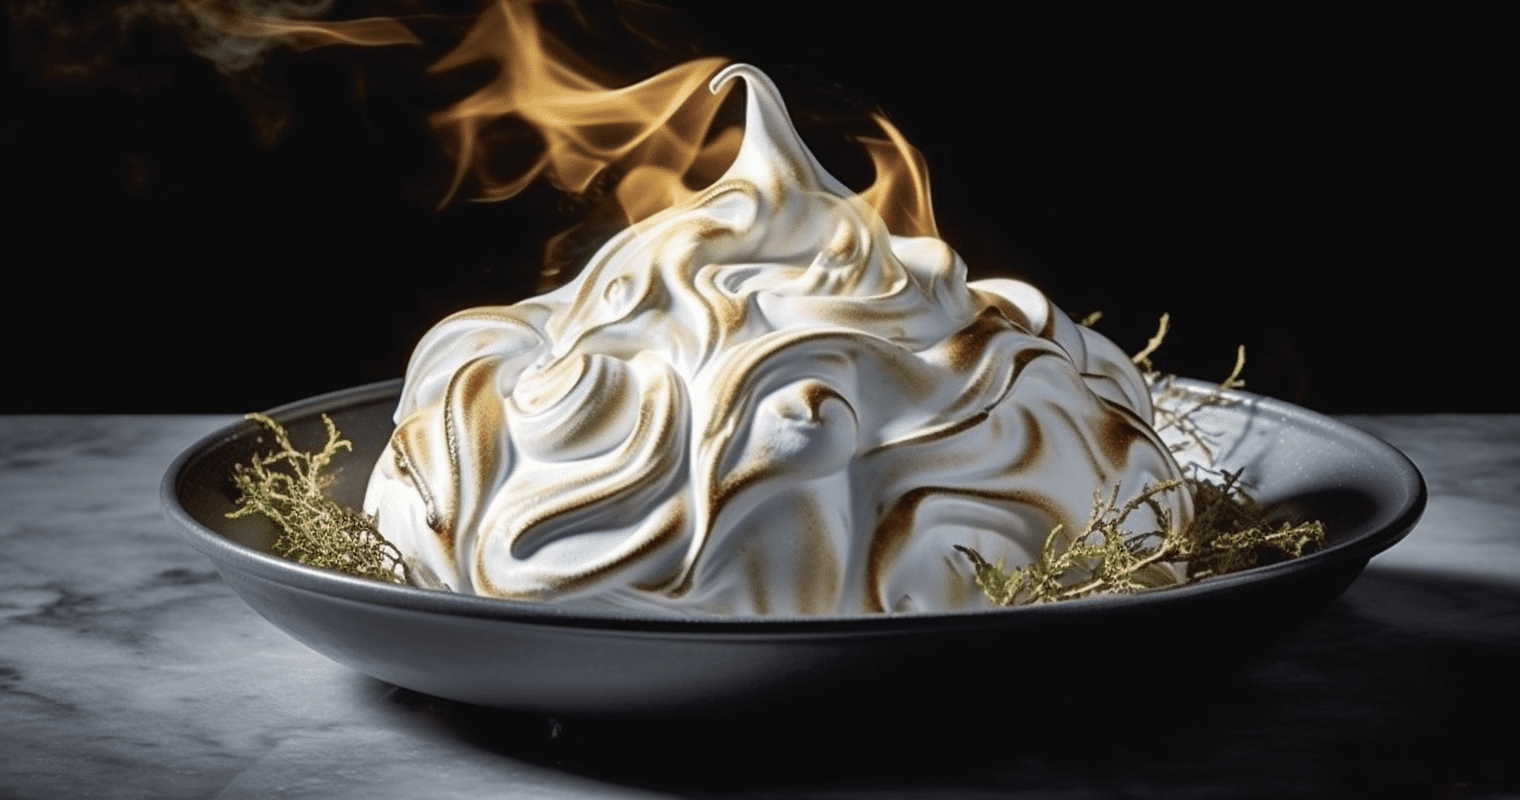 The Magical Dessert: Baked Alaska - A Fusion of Fire and Ice